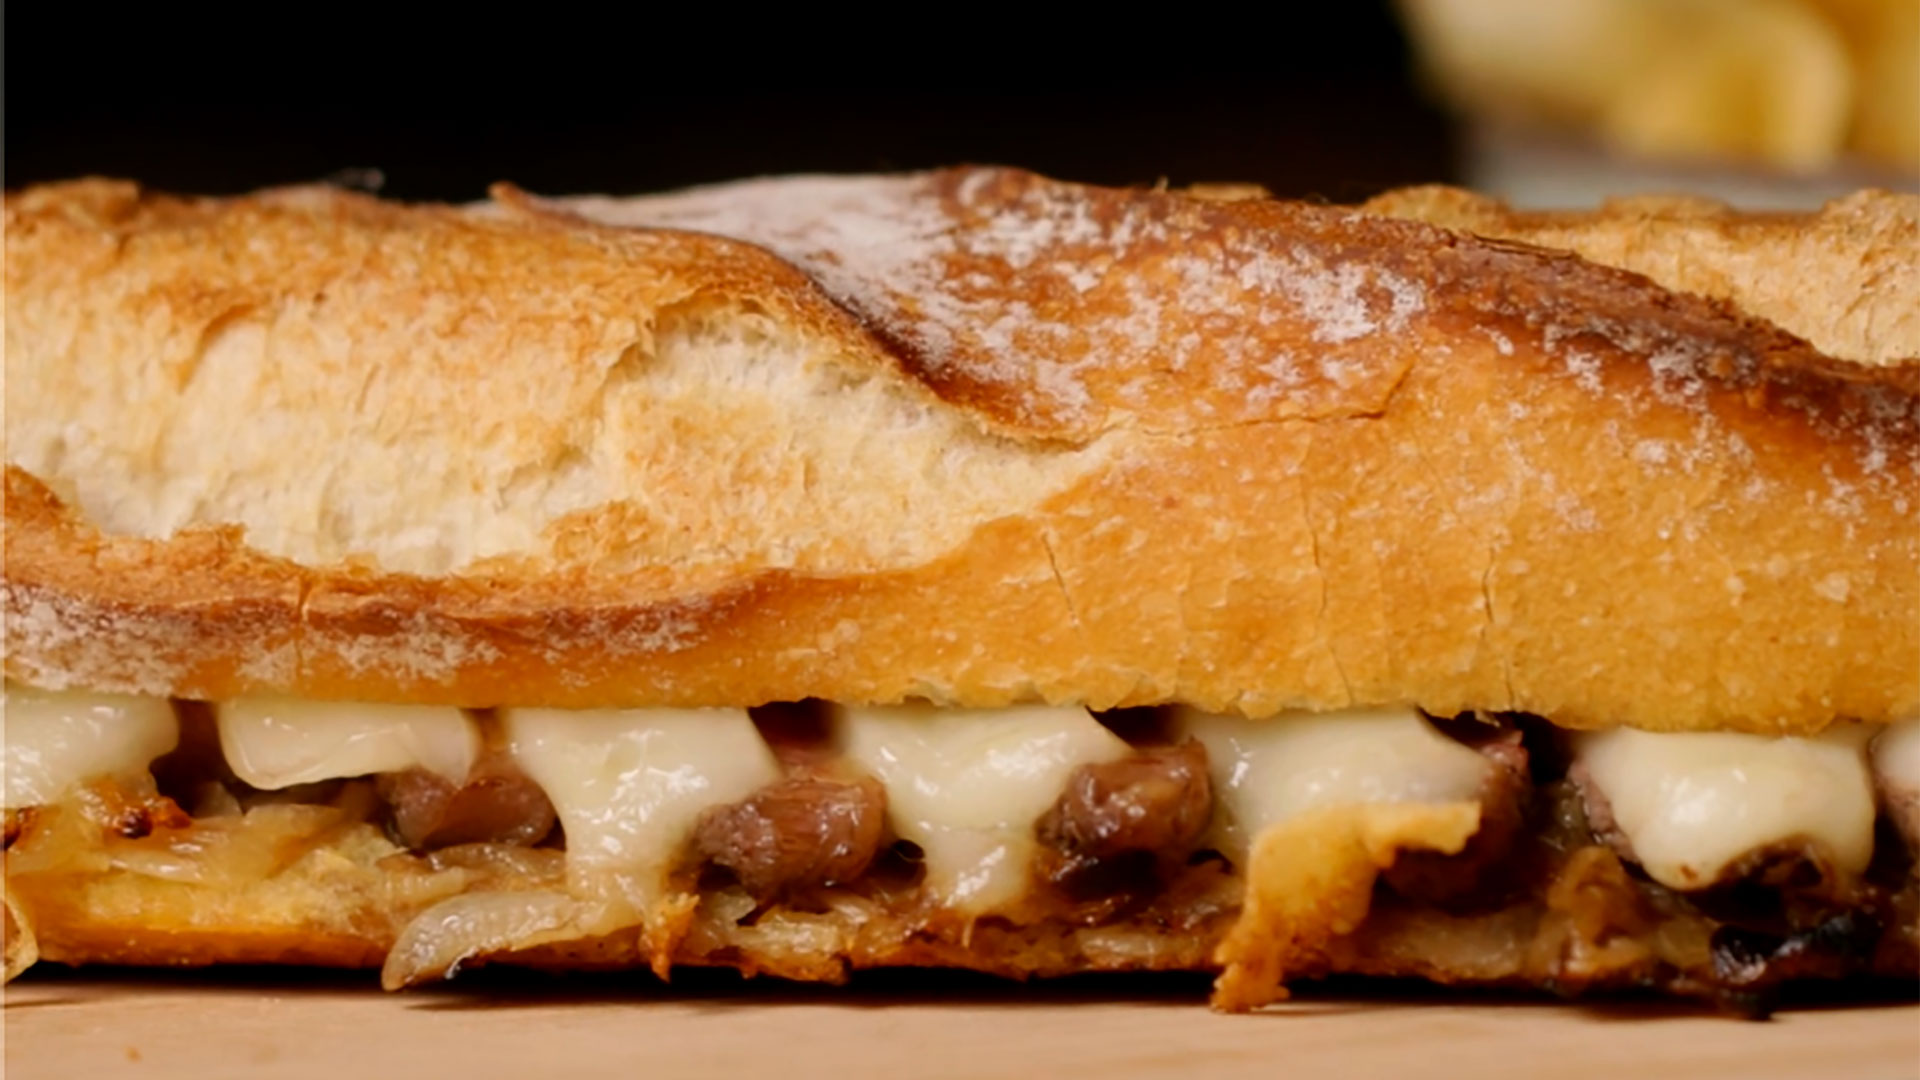 Beef entrecôte, provolone, and caramelized onion sandwich 